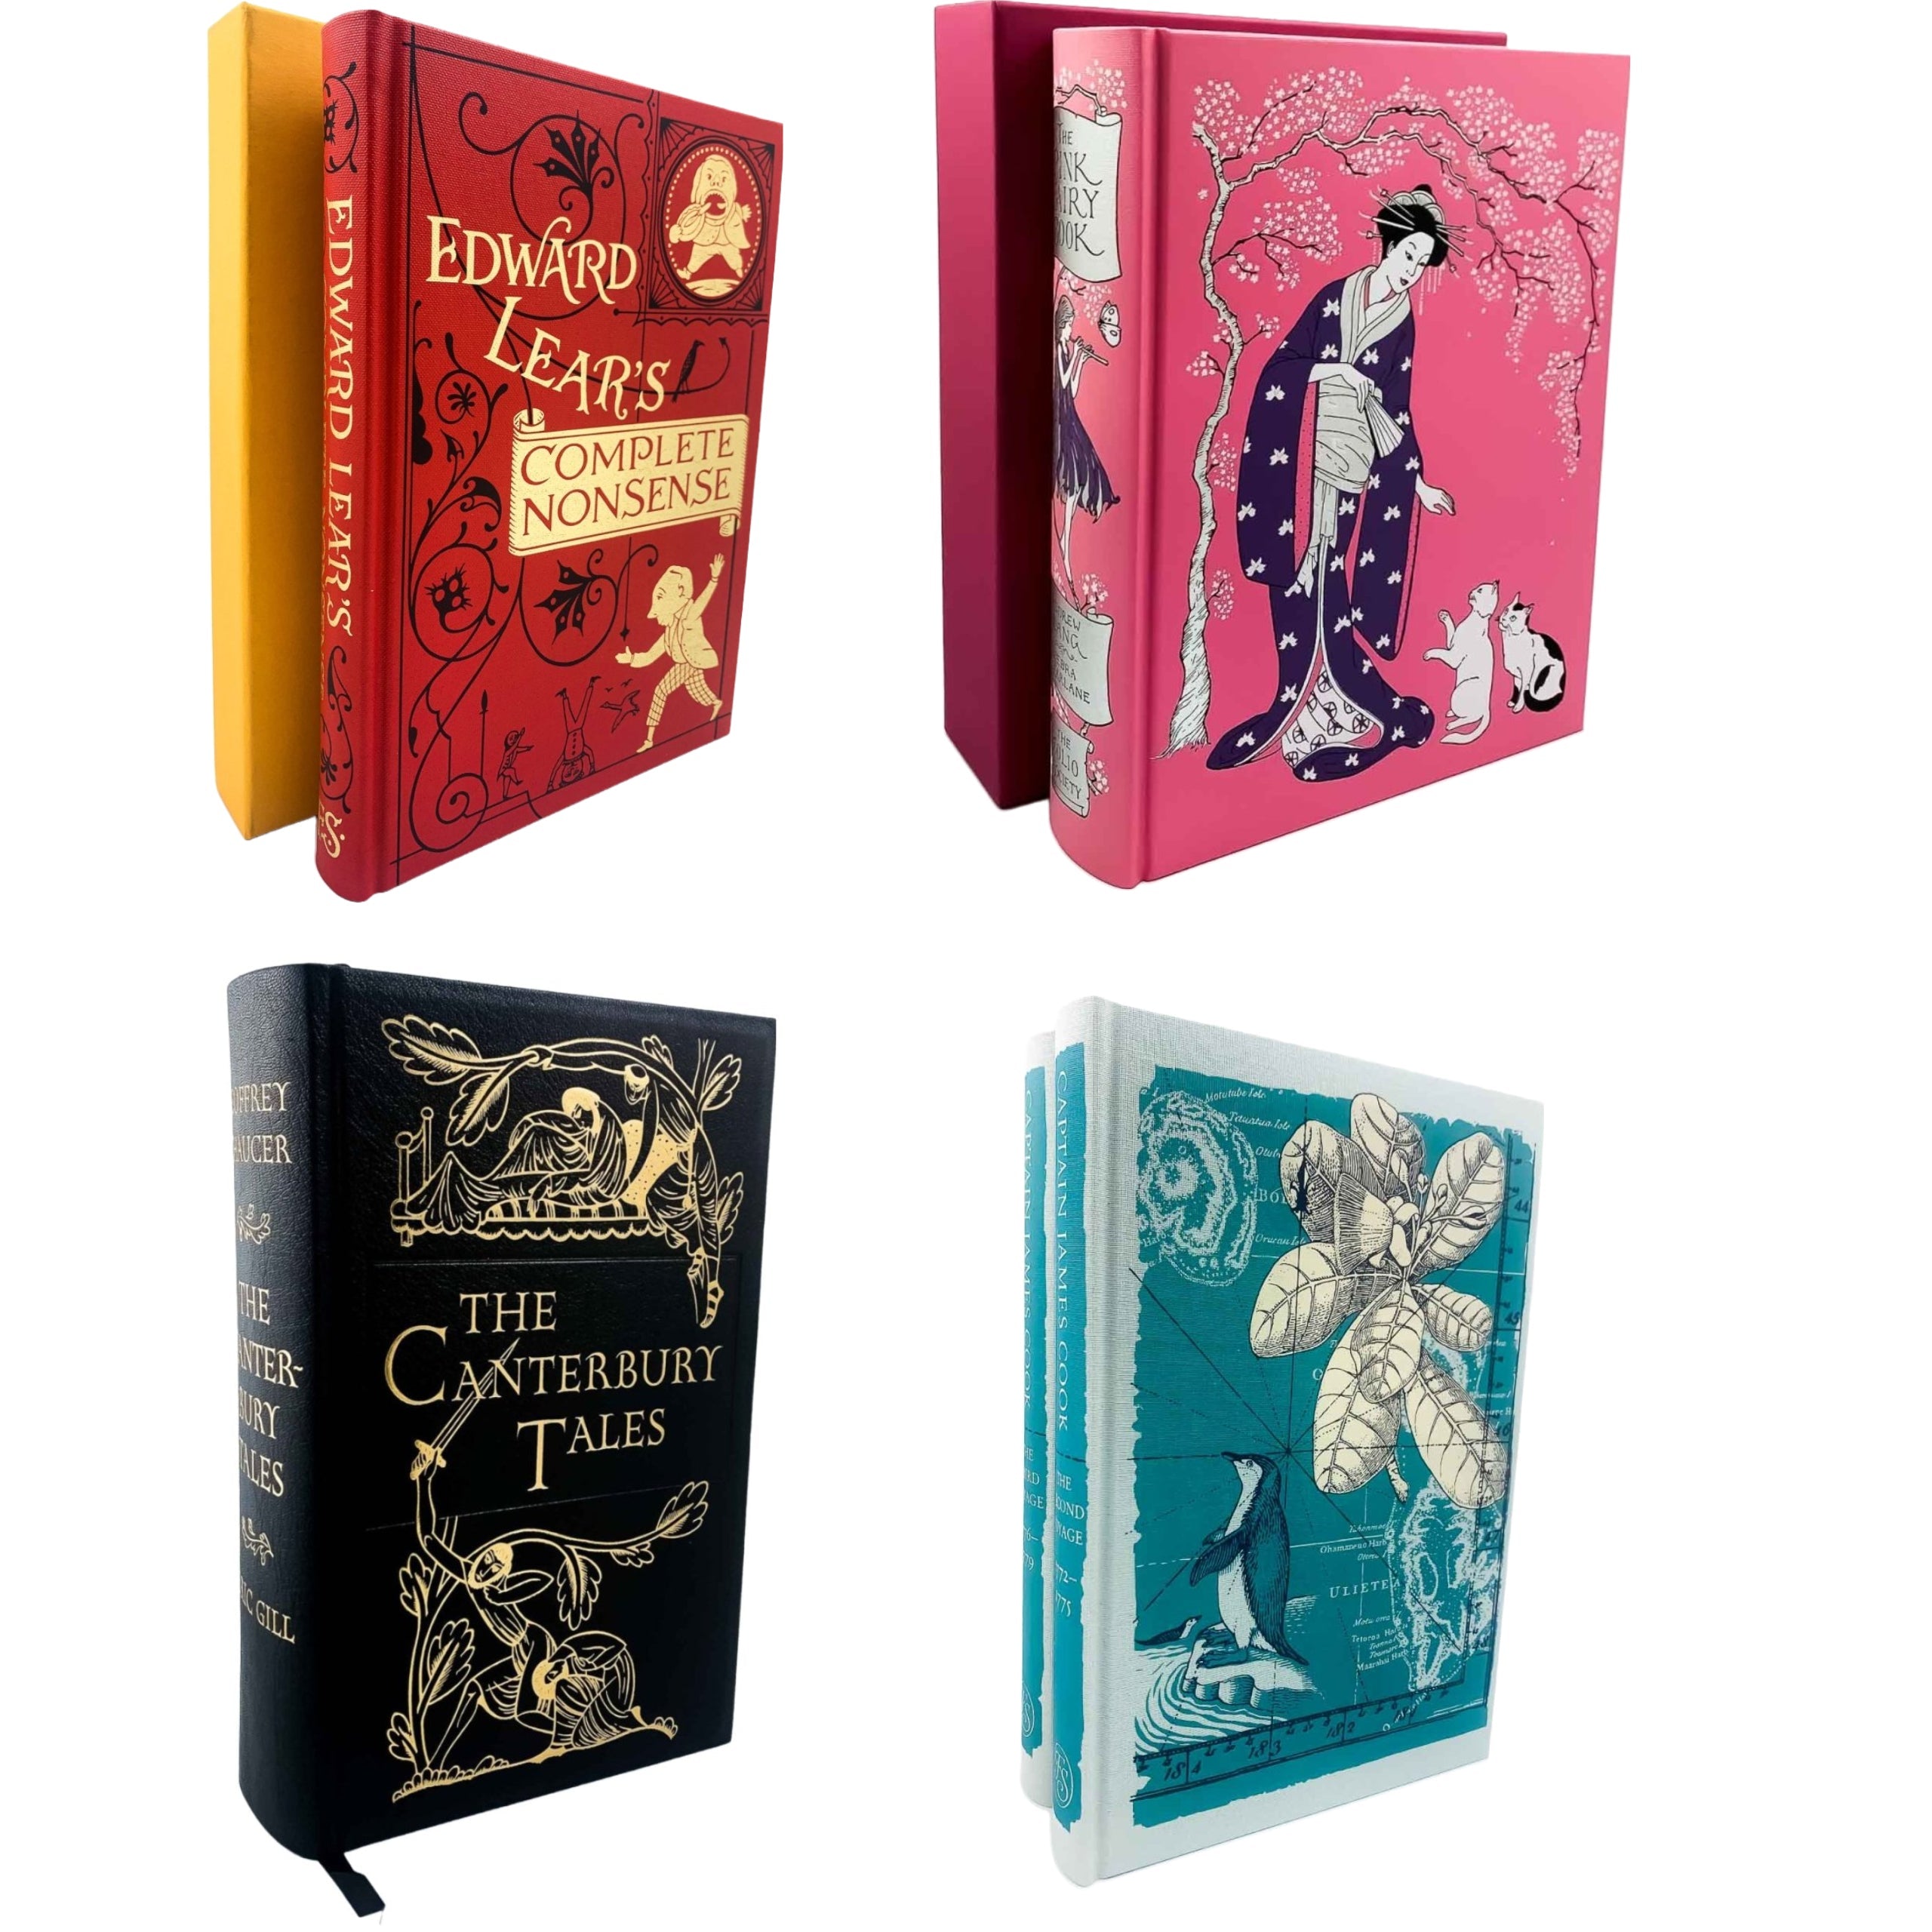 The Order of Time  The Folio Society